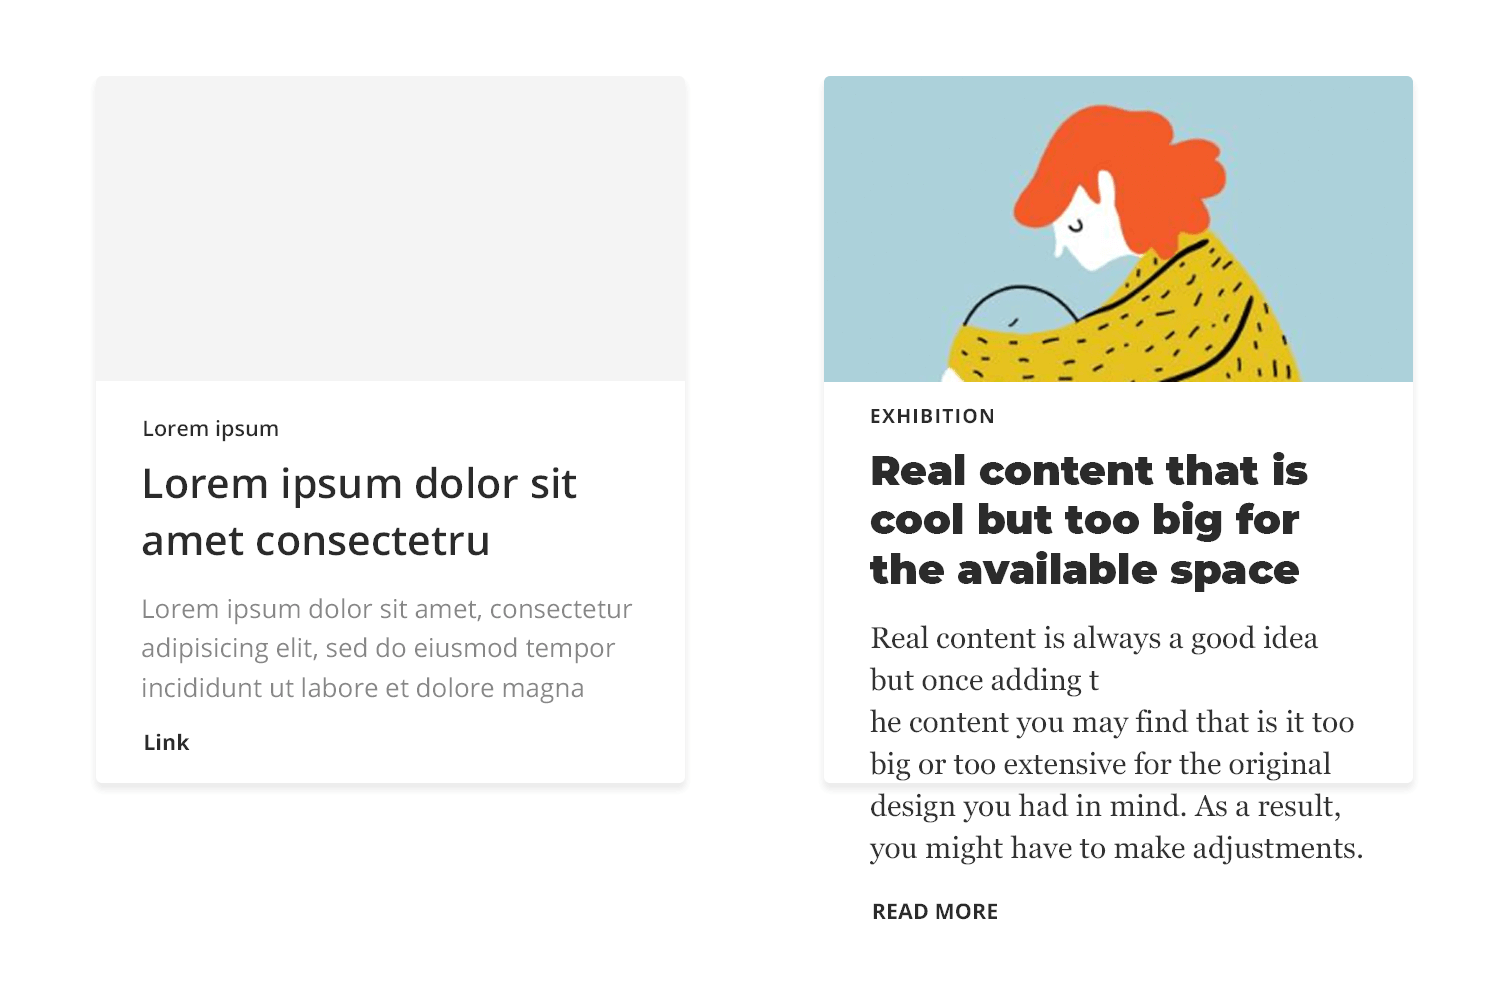 using lorem ipsum in wireframe design can lead to the need to make adjustments later on